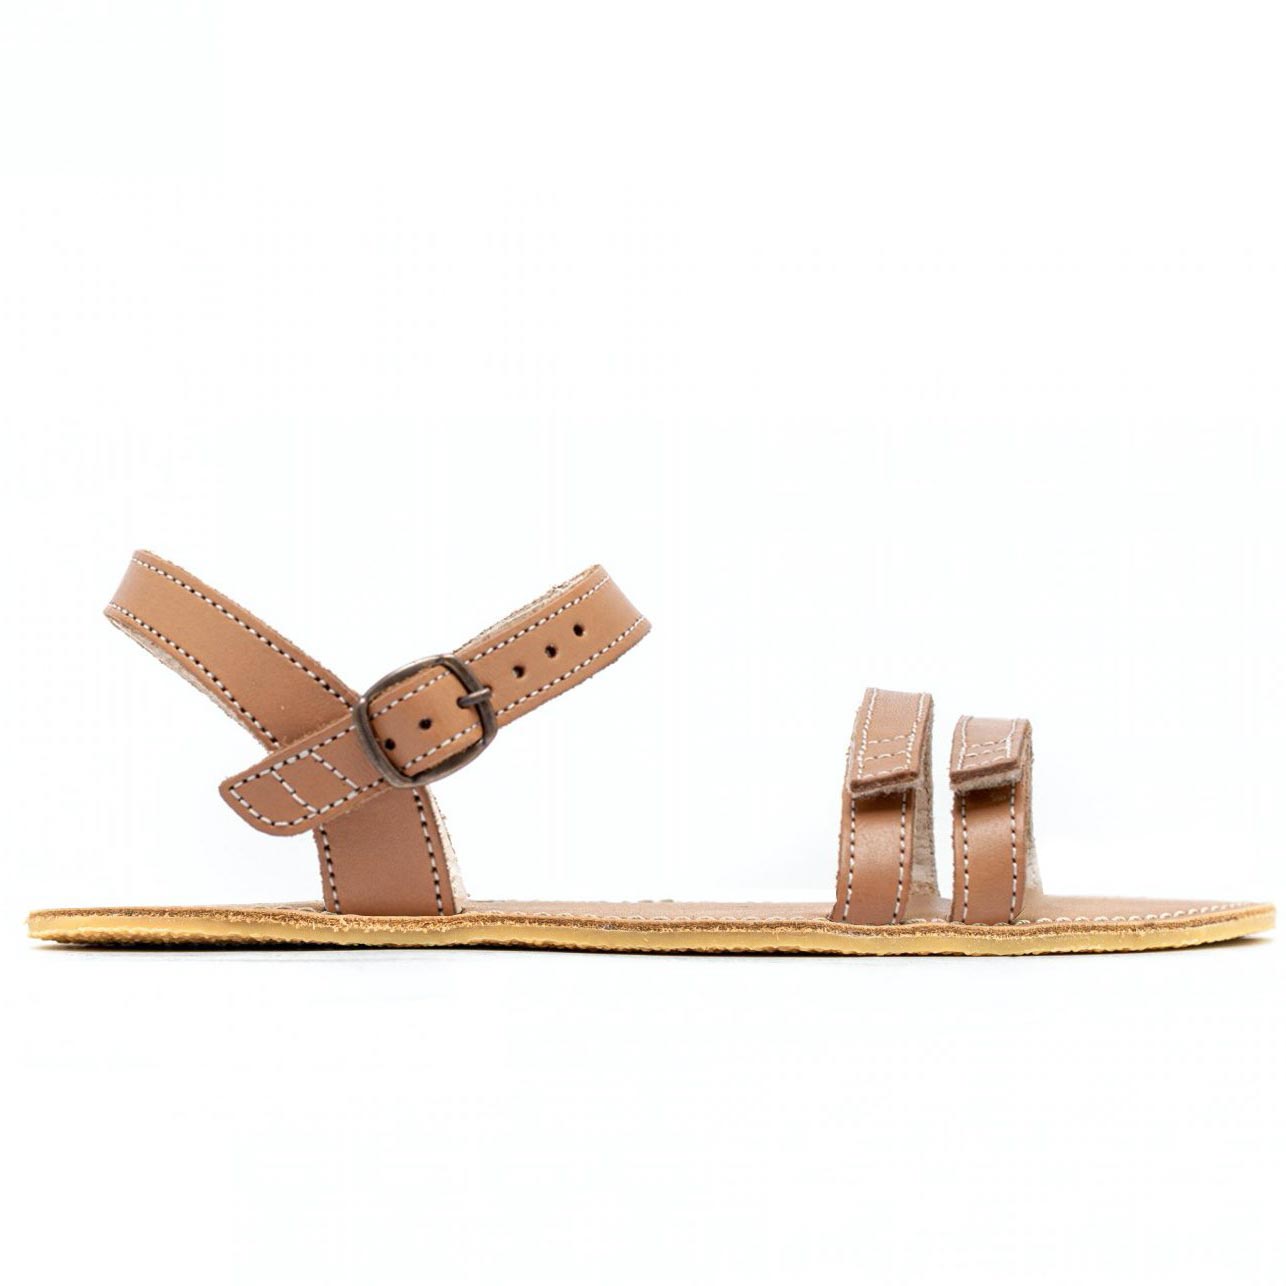 A photo of Brown Be Lenka Summer Sandals made with leather and tan rubber soles. The sandals are medium brown in color and have thin double straps on the front of the foot. They also have straps that go around the ankle and heel and have a small buckle. One sandal is shown from the right side against a white background in this photo. #color_brown